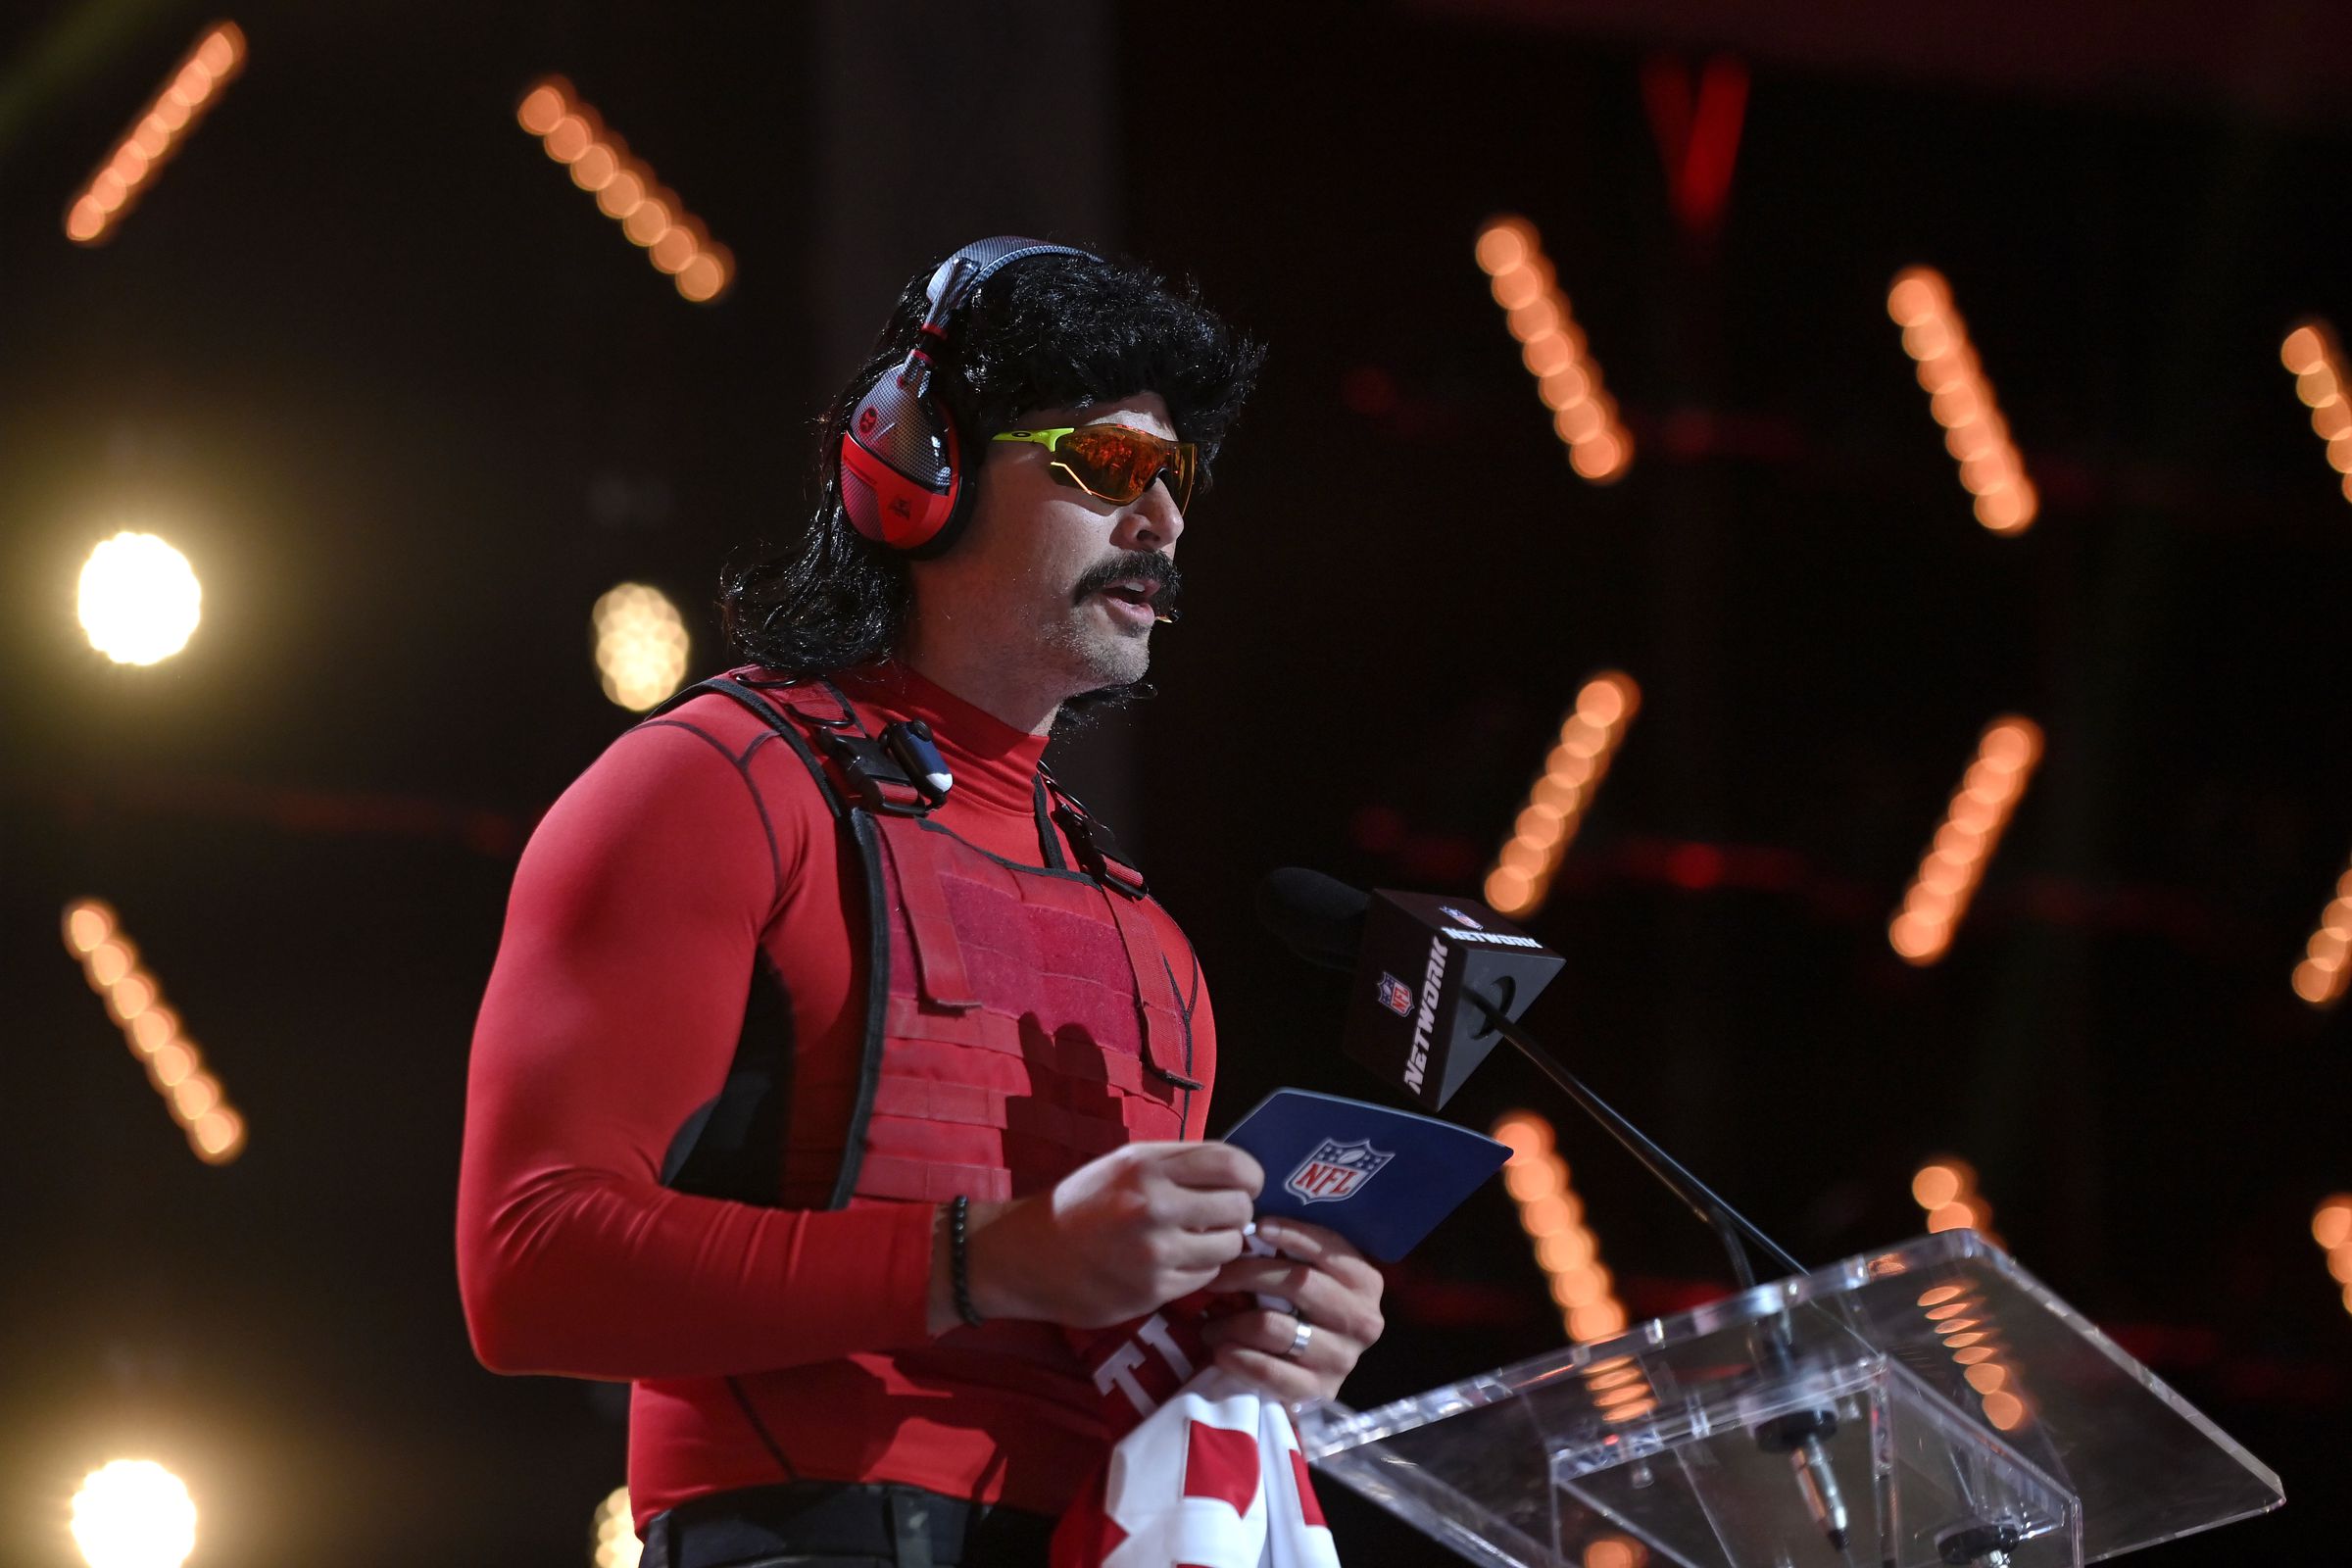 A photograph of Guy Beahm, also known as Dr Disrespect, at the 2022 NFL Draft